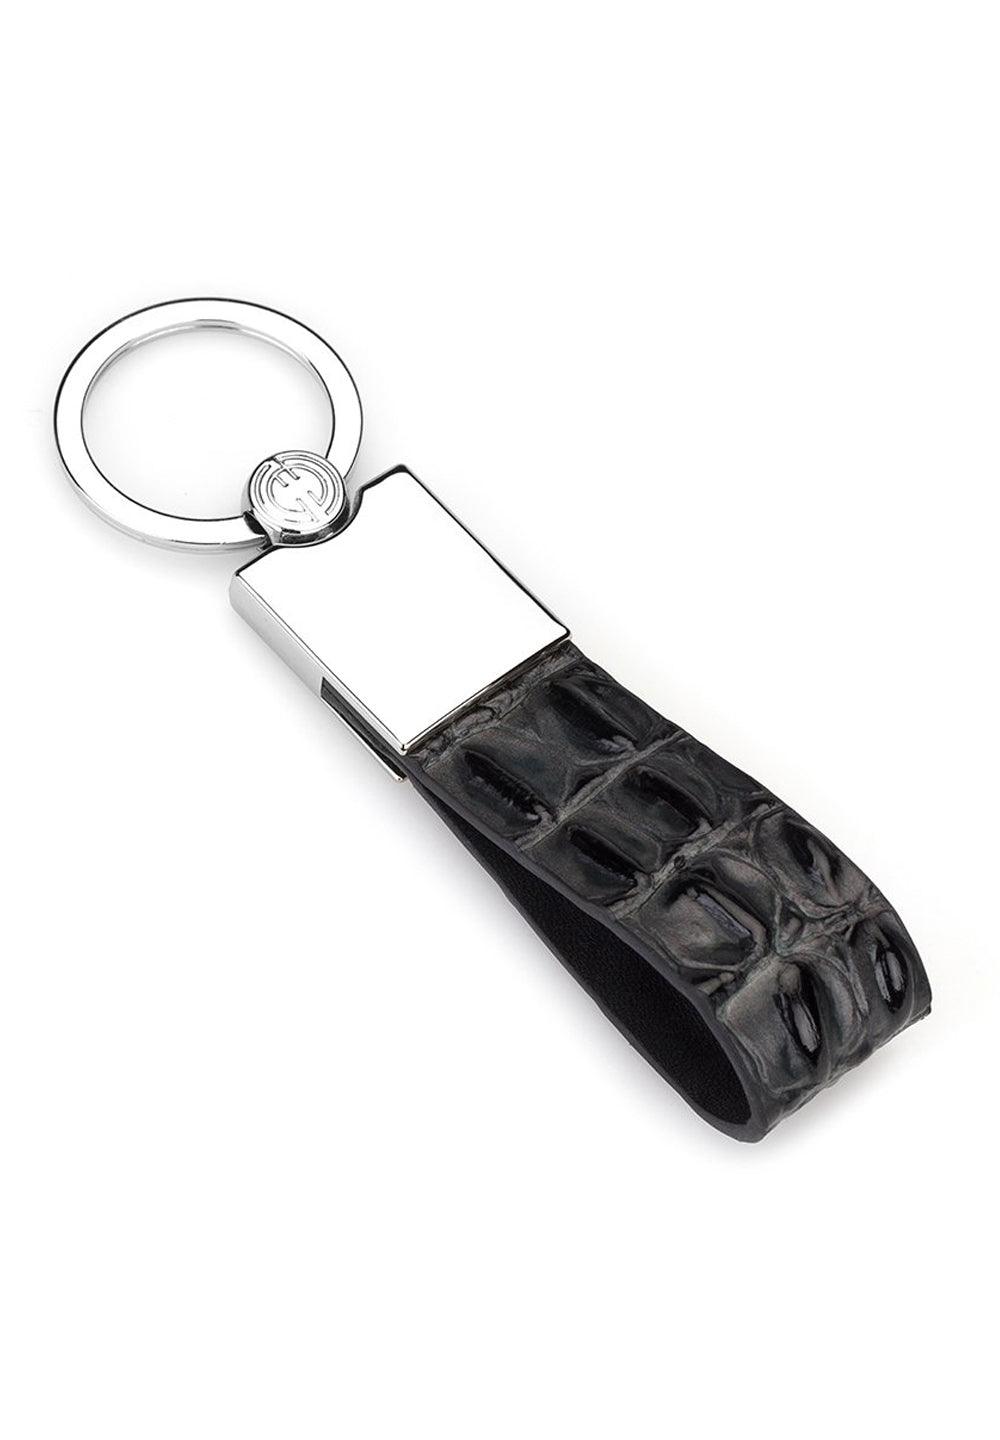 Great gift giving idea for yourself or that individual that has everything.  Leather stamped and shaded croc pattern. Contemporary chrome key attachment. Approximately 3" by 1/2". By Marcello Sport